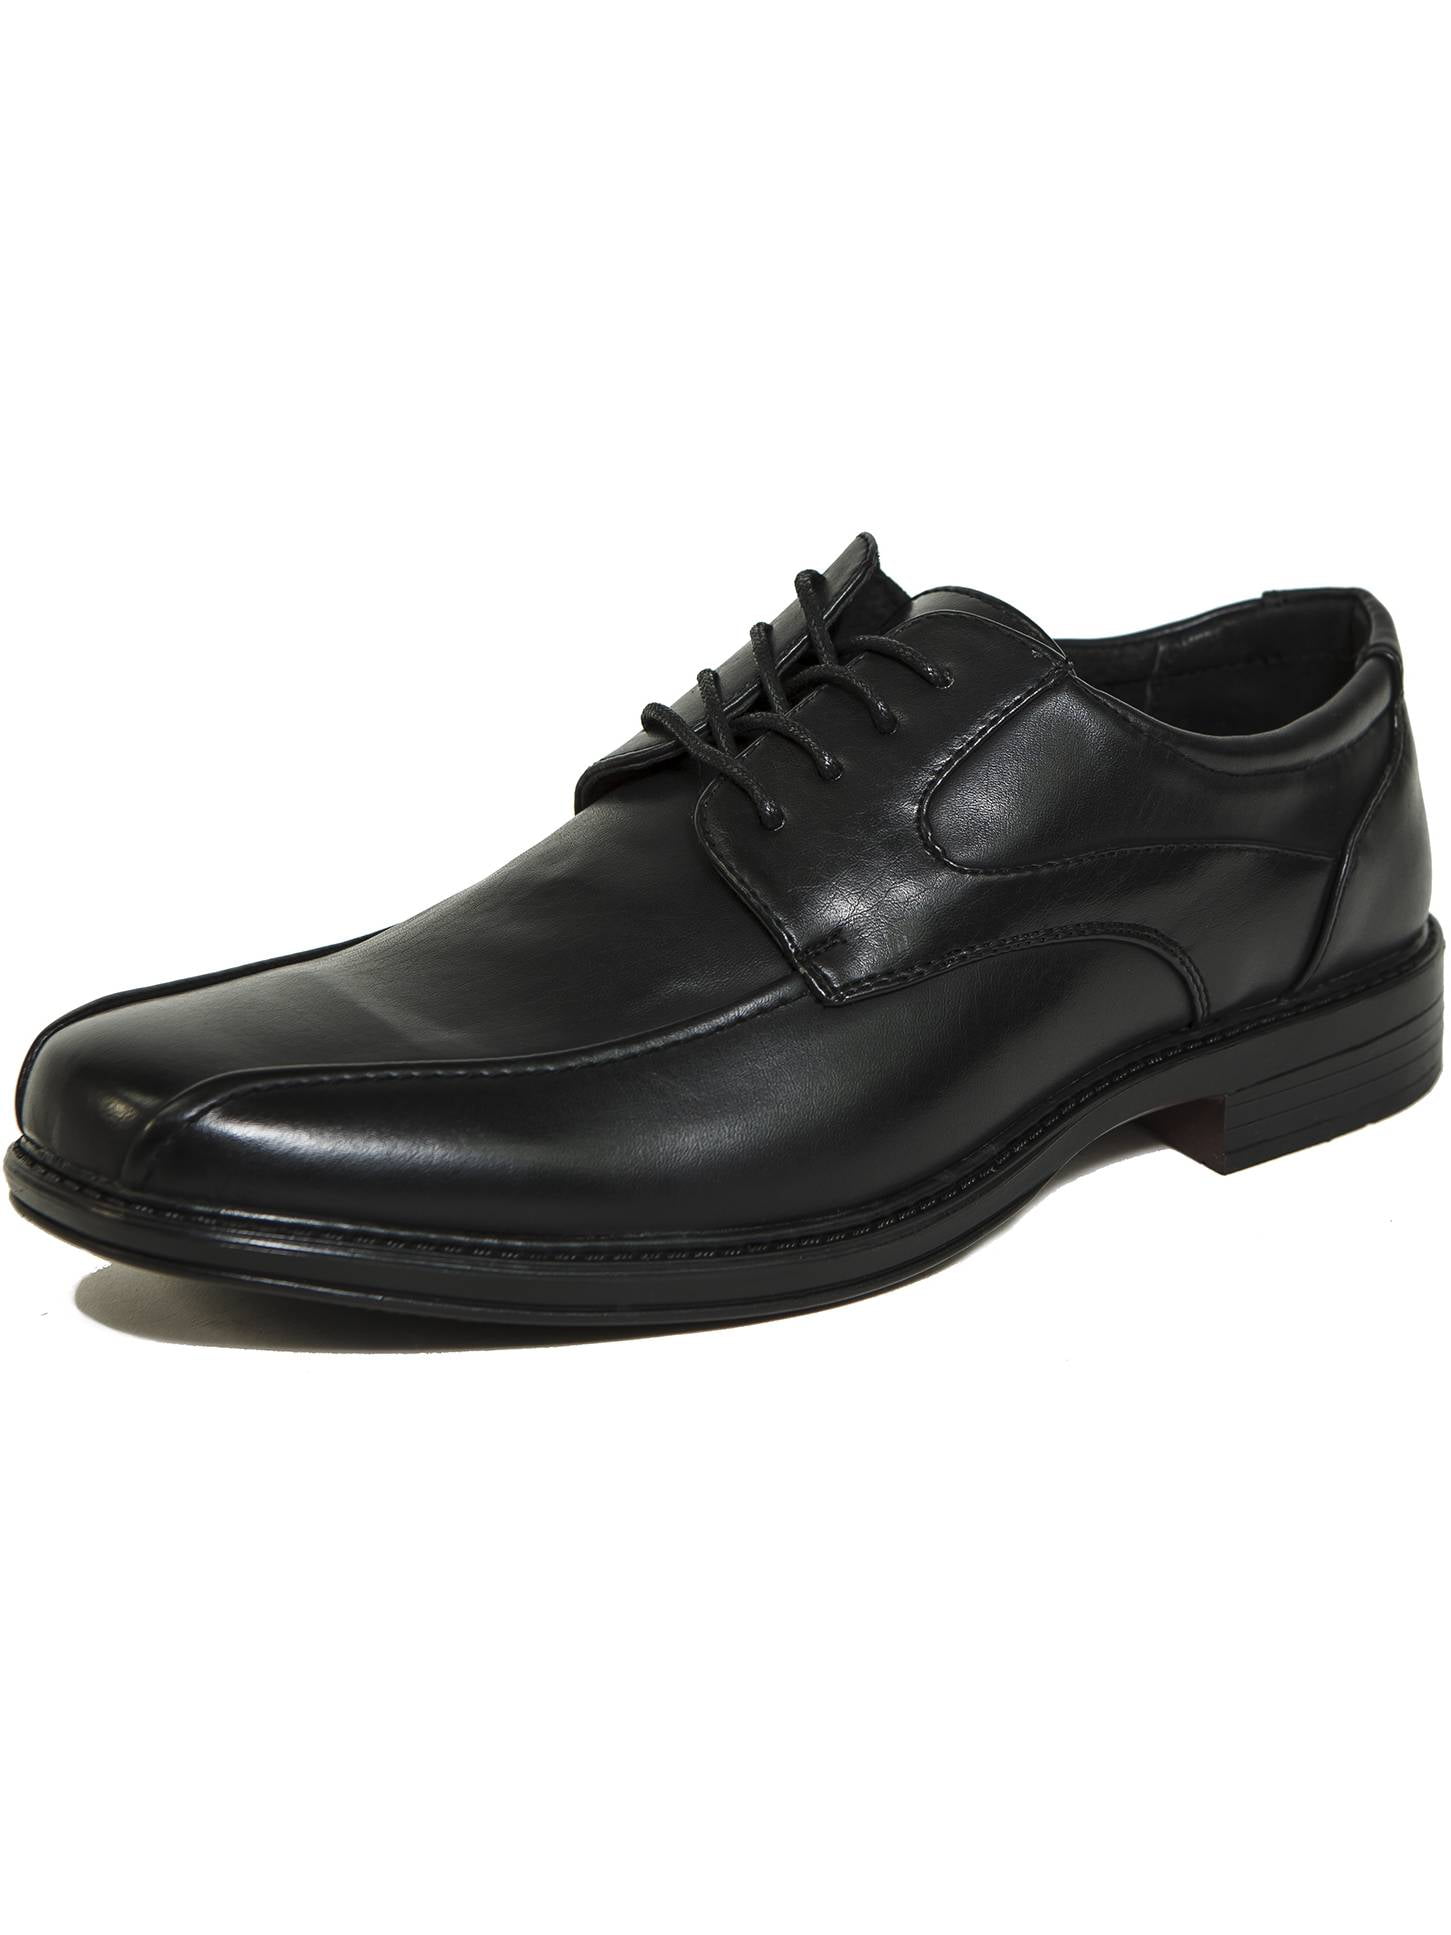 AlpineSwiss Mens Oxford Dress Shoes Lace Up Leather Lined Baseball ...